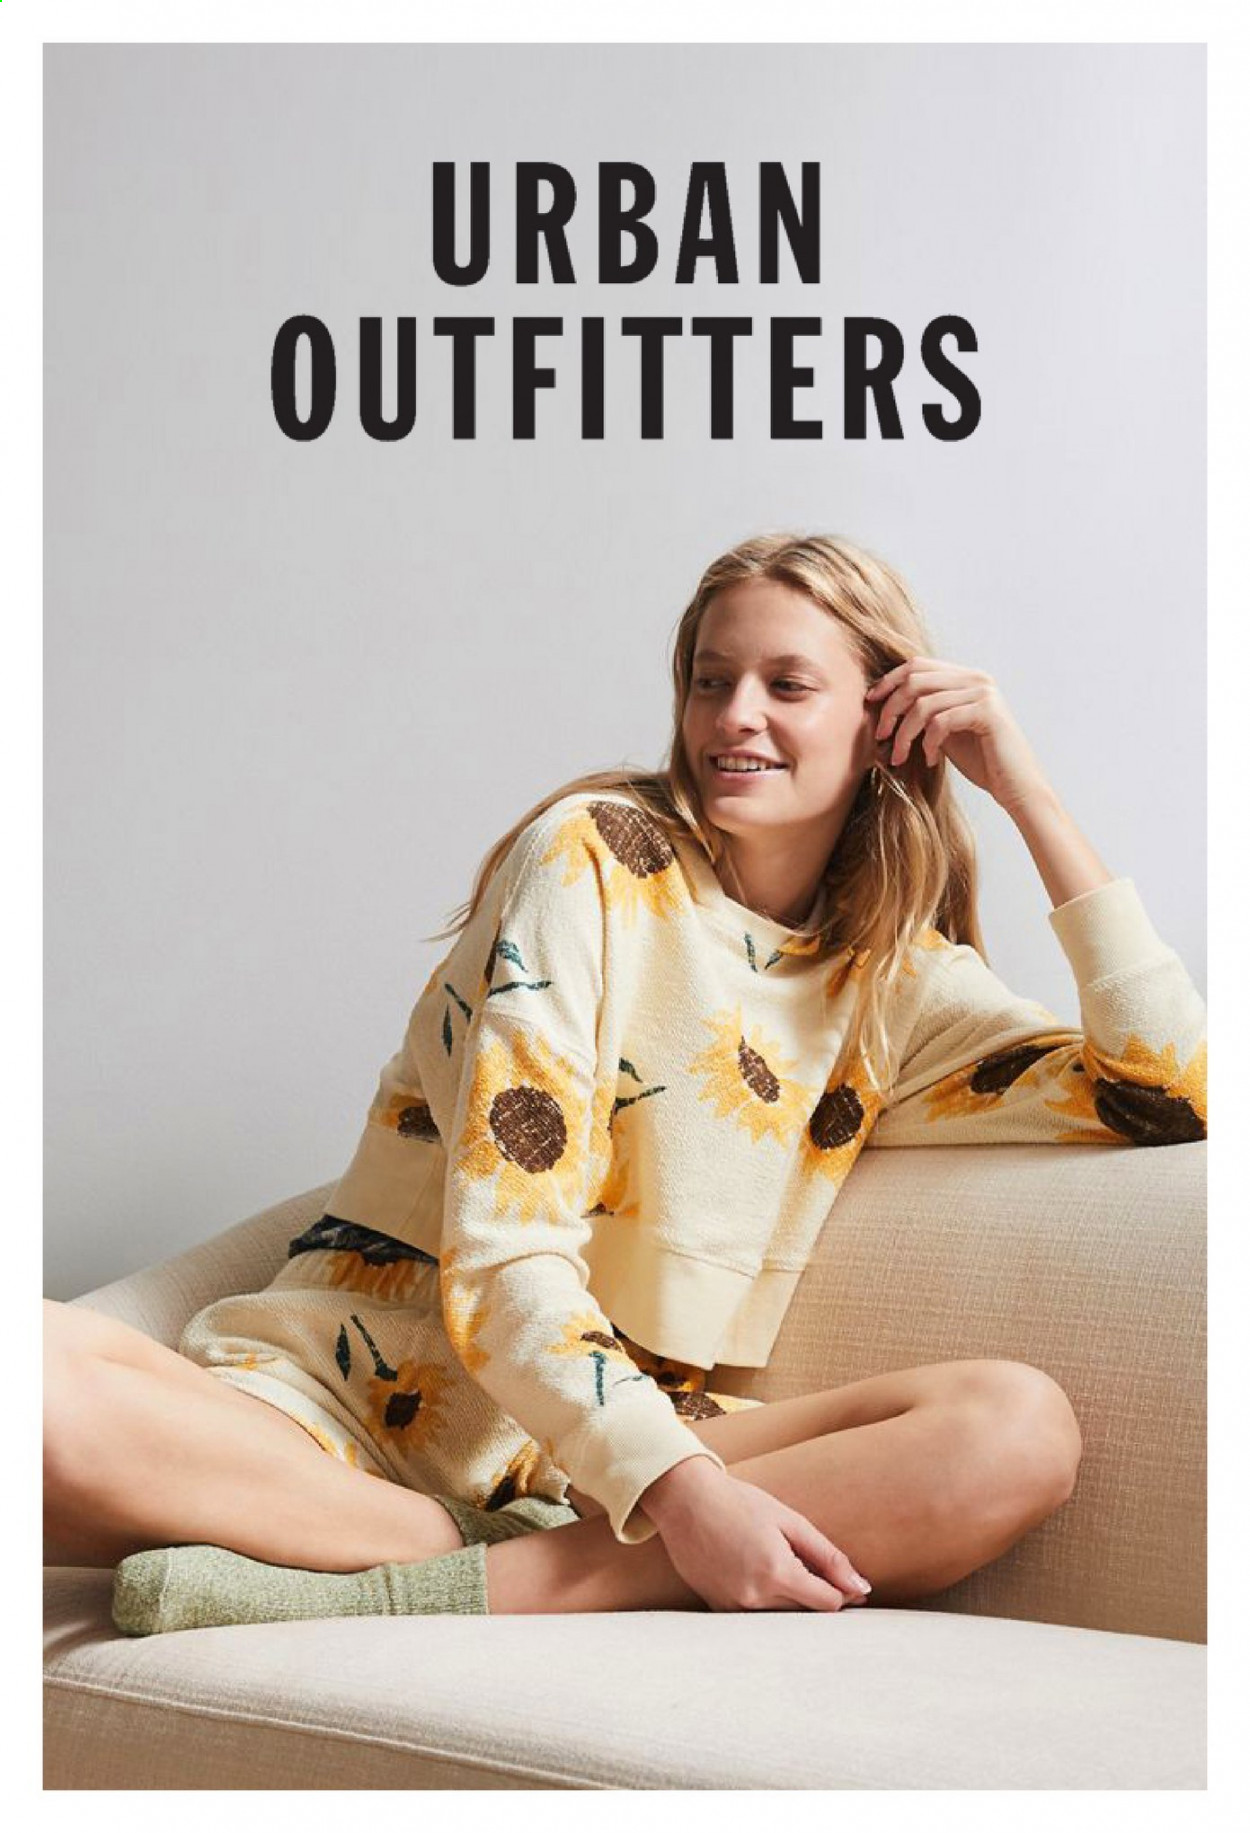 Urban Outfitters flyer .